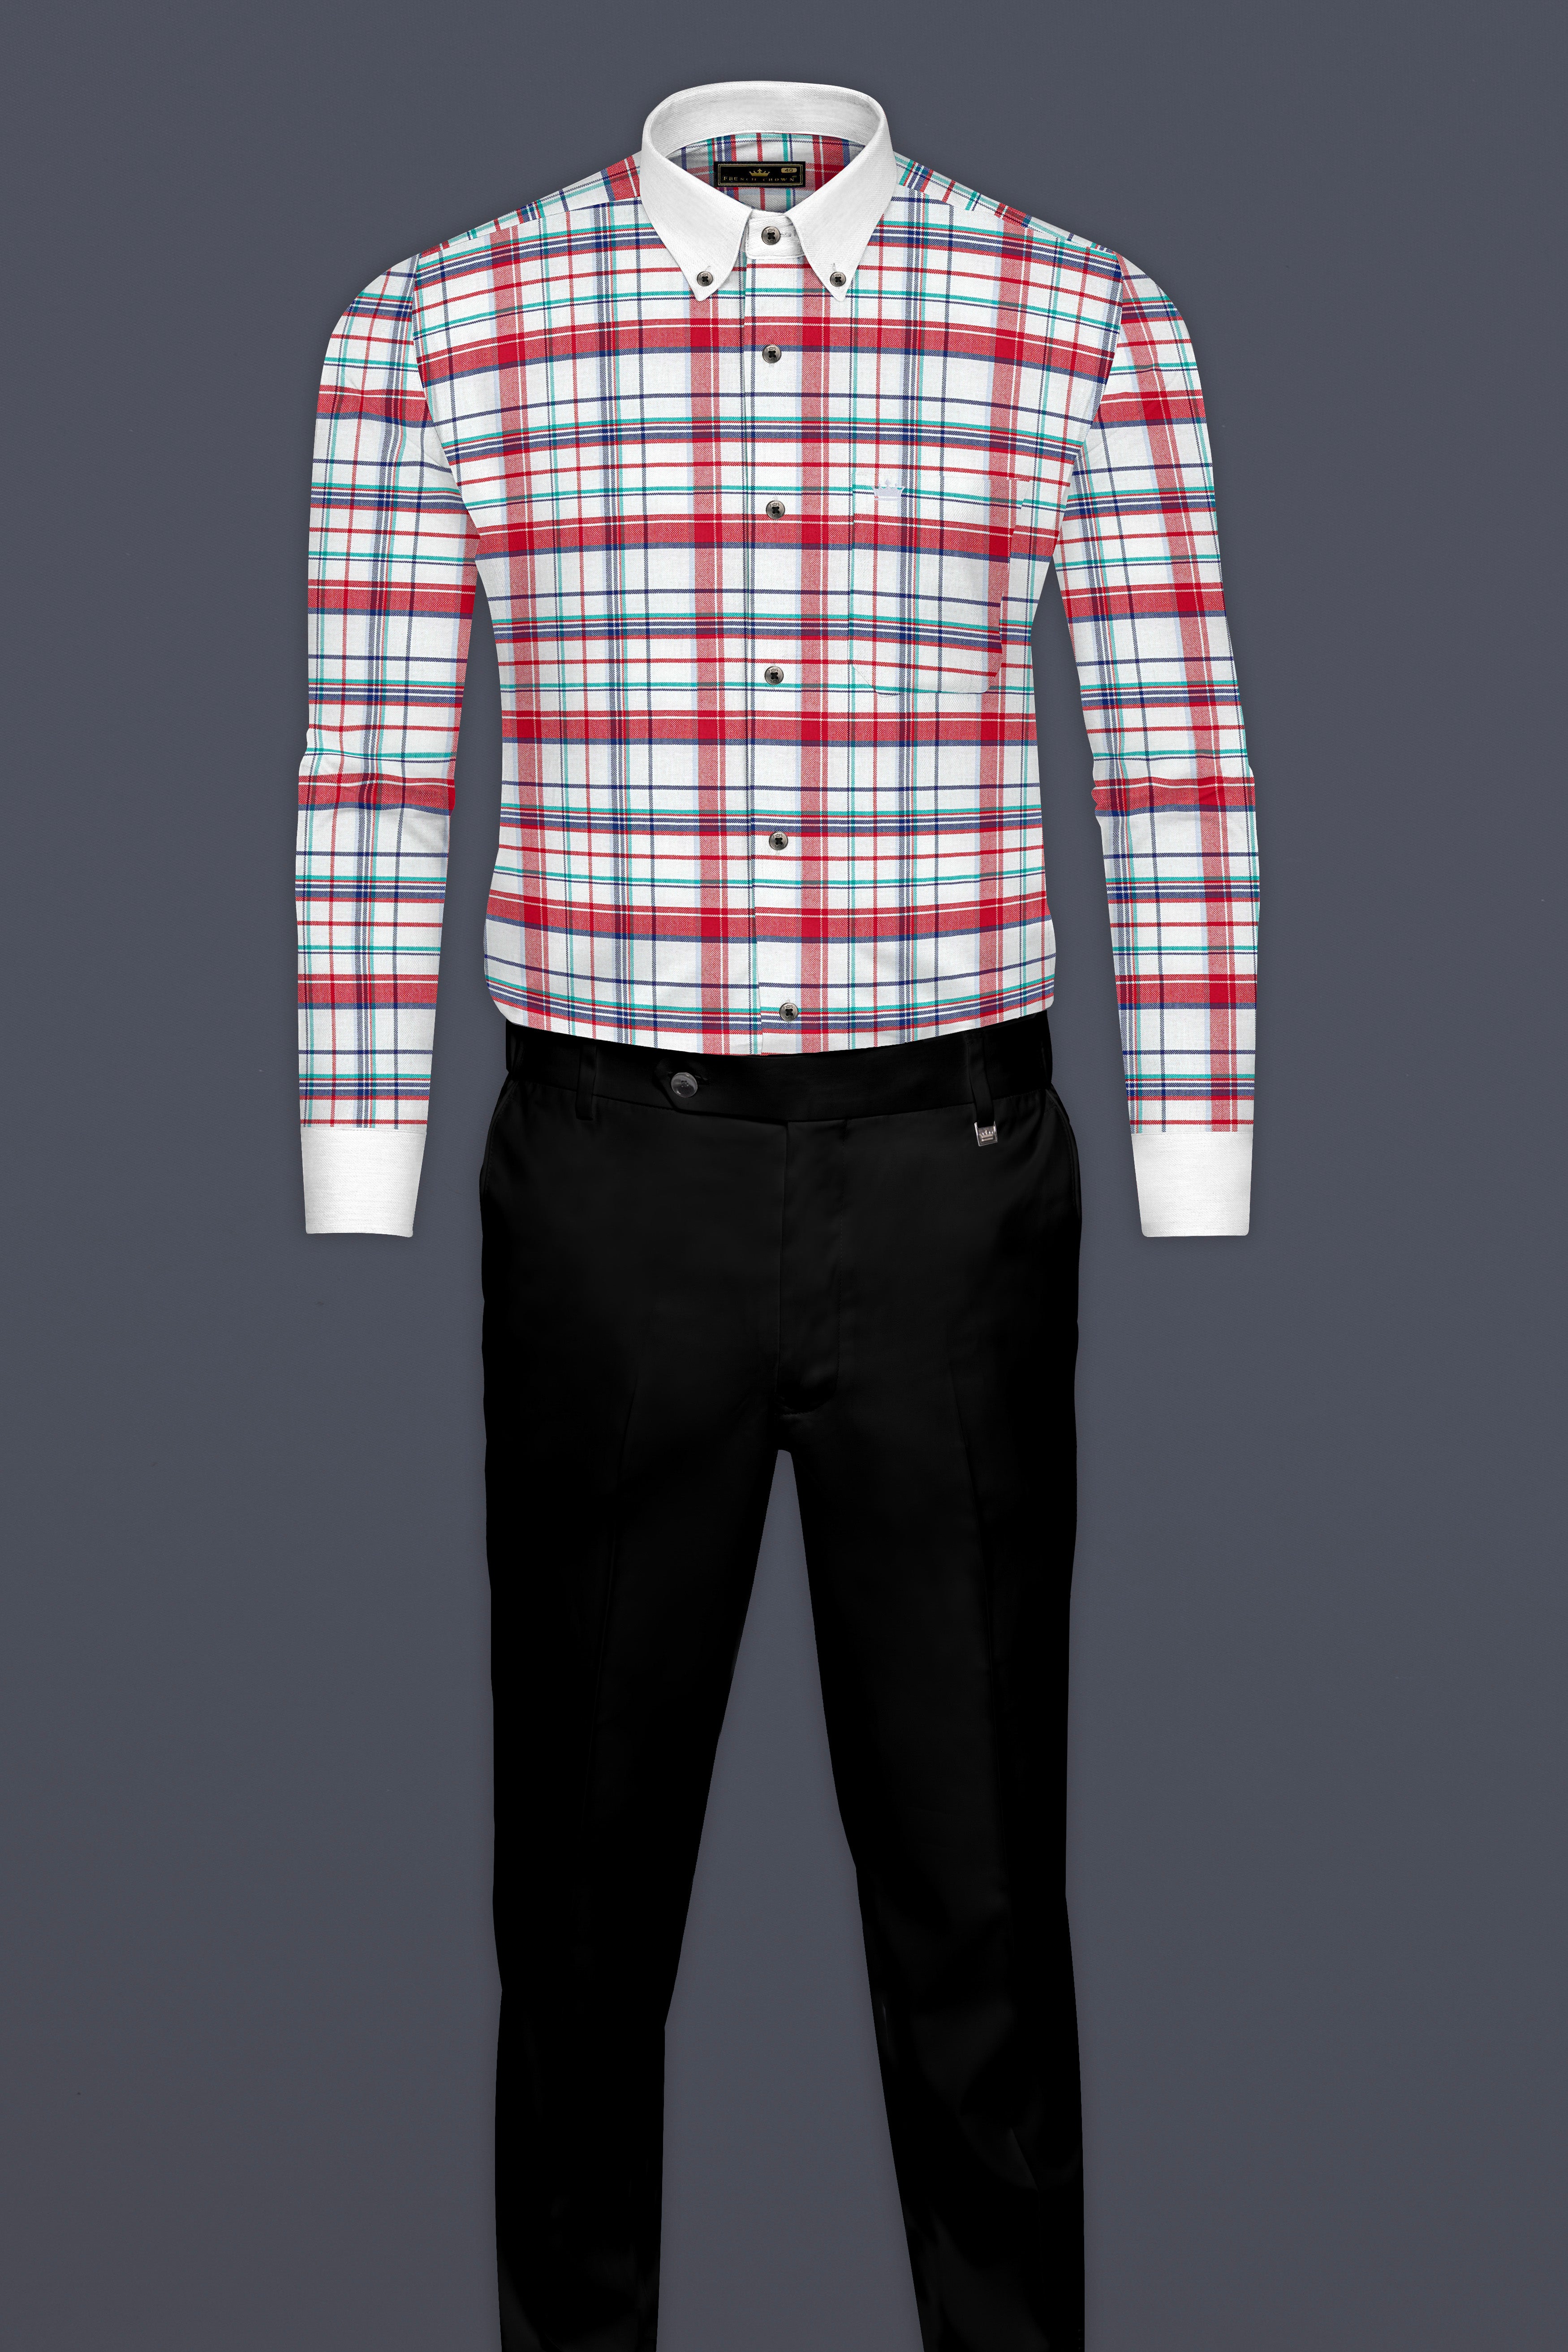 Shiraz Red with Electric Blue and White Plaid Royal Oxford Shirt